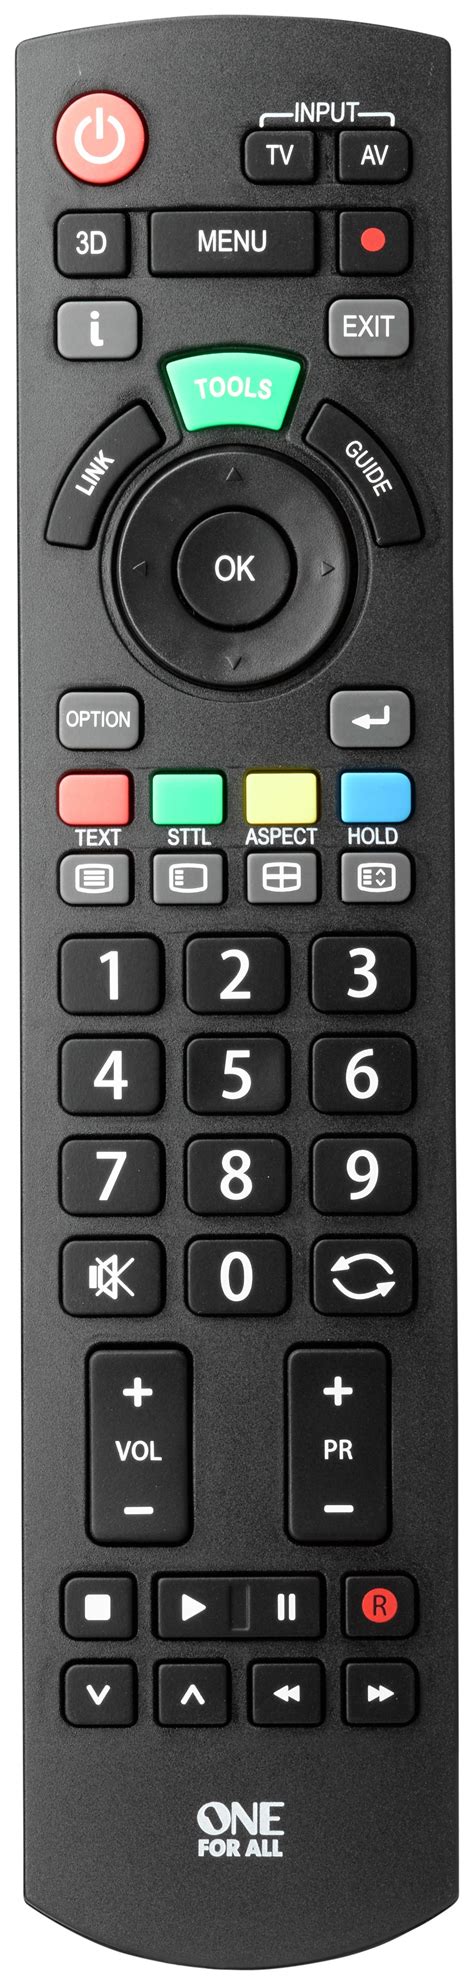 panasonic replacement remote control reviews